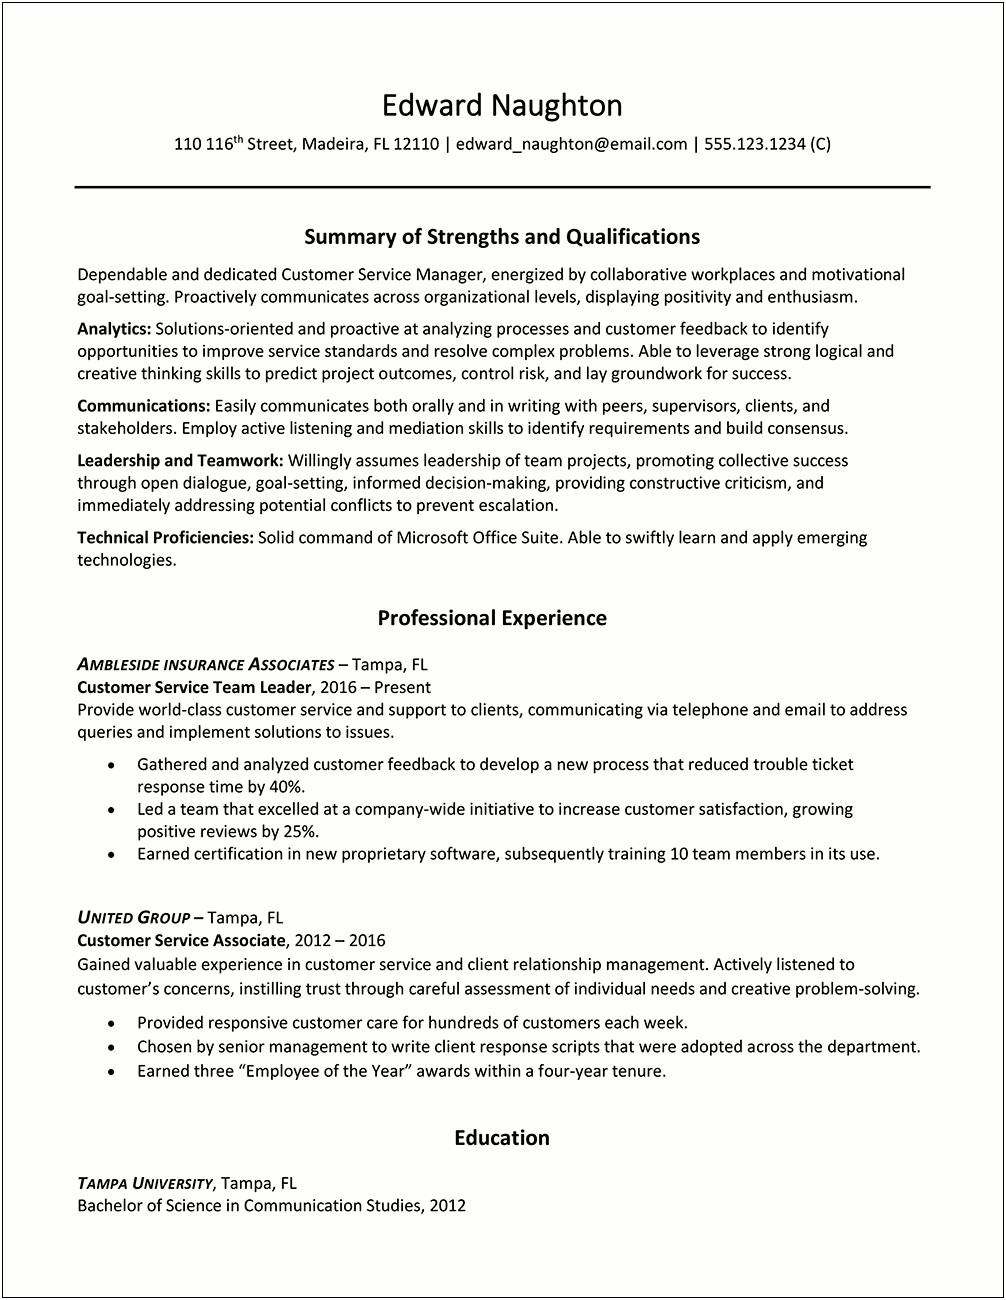 Examples Of Strengths And Skills For Resume